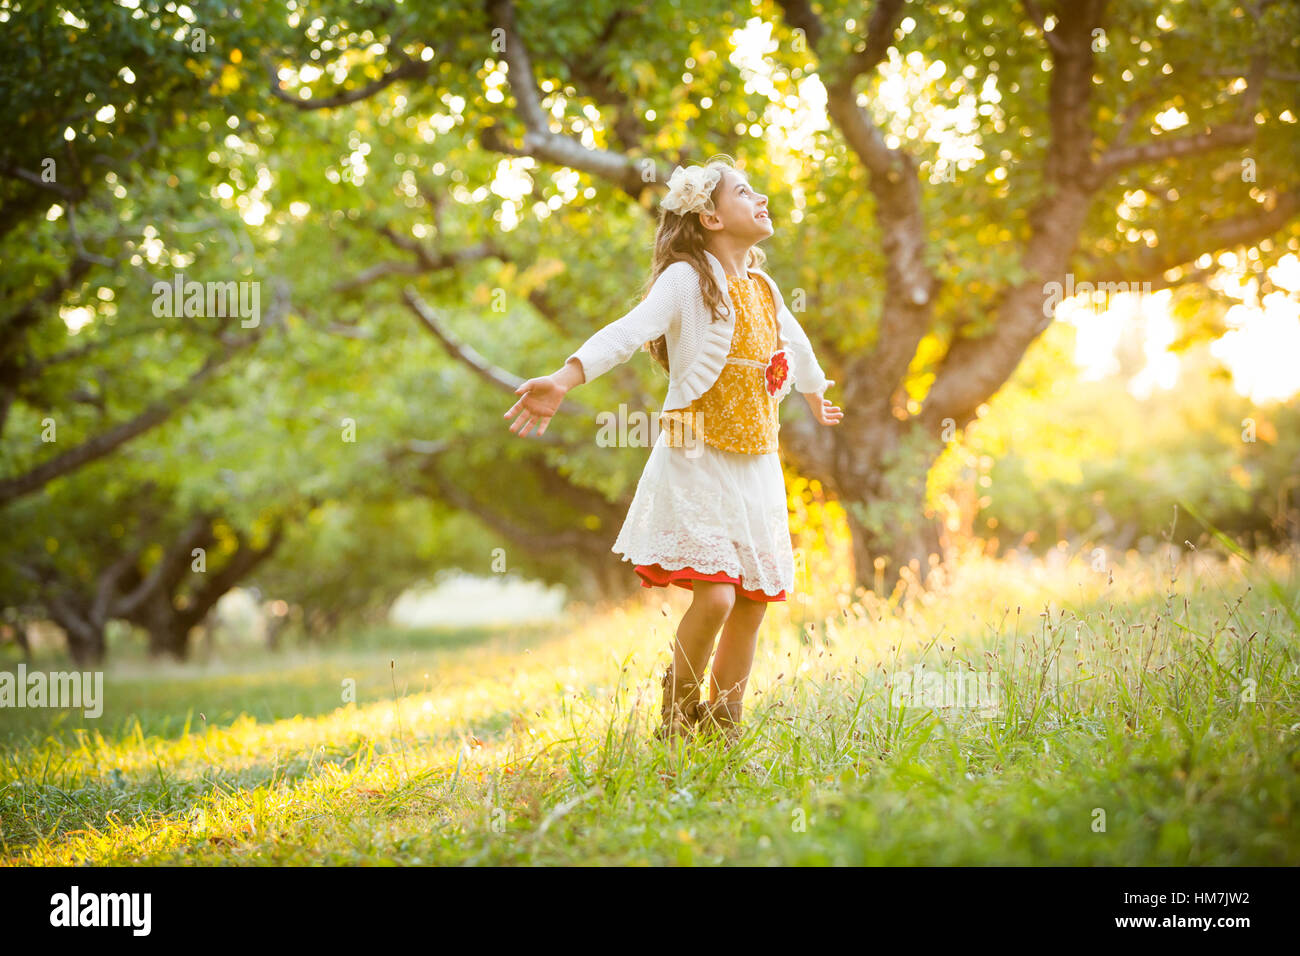 Carefree girl spinning in orchard with outstretched arms Stock Photo